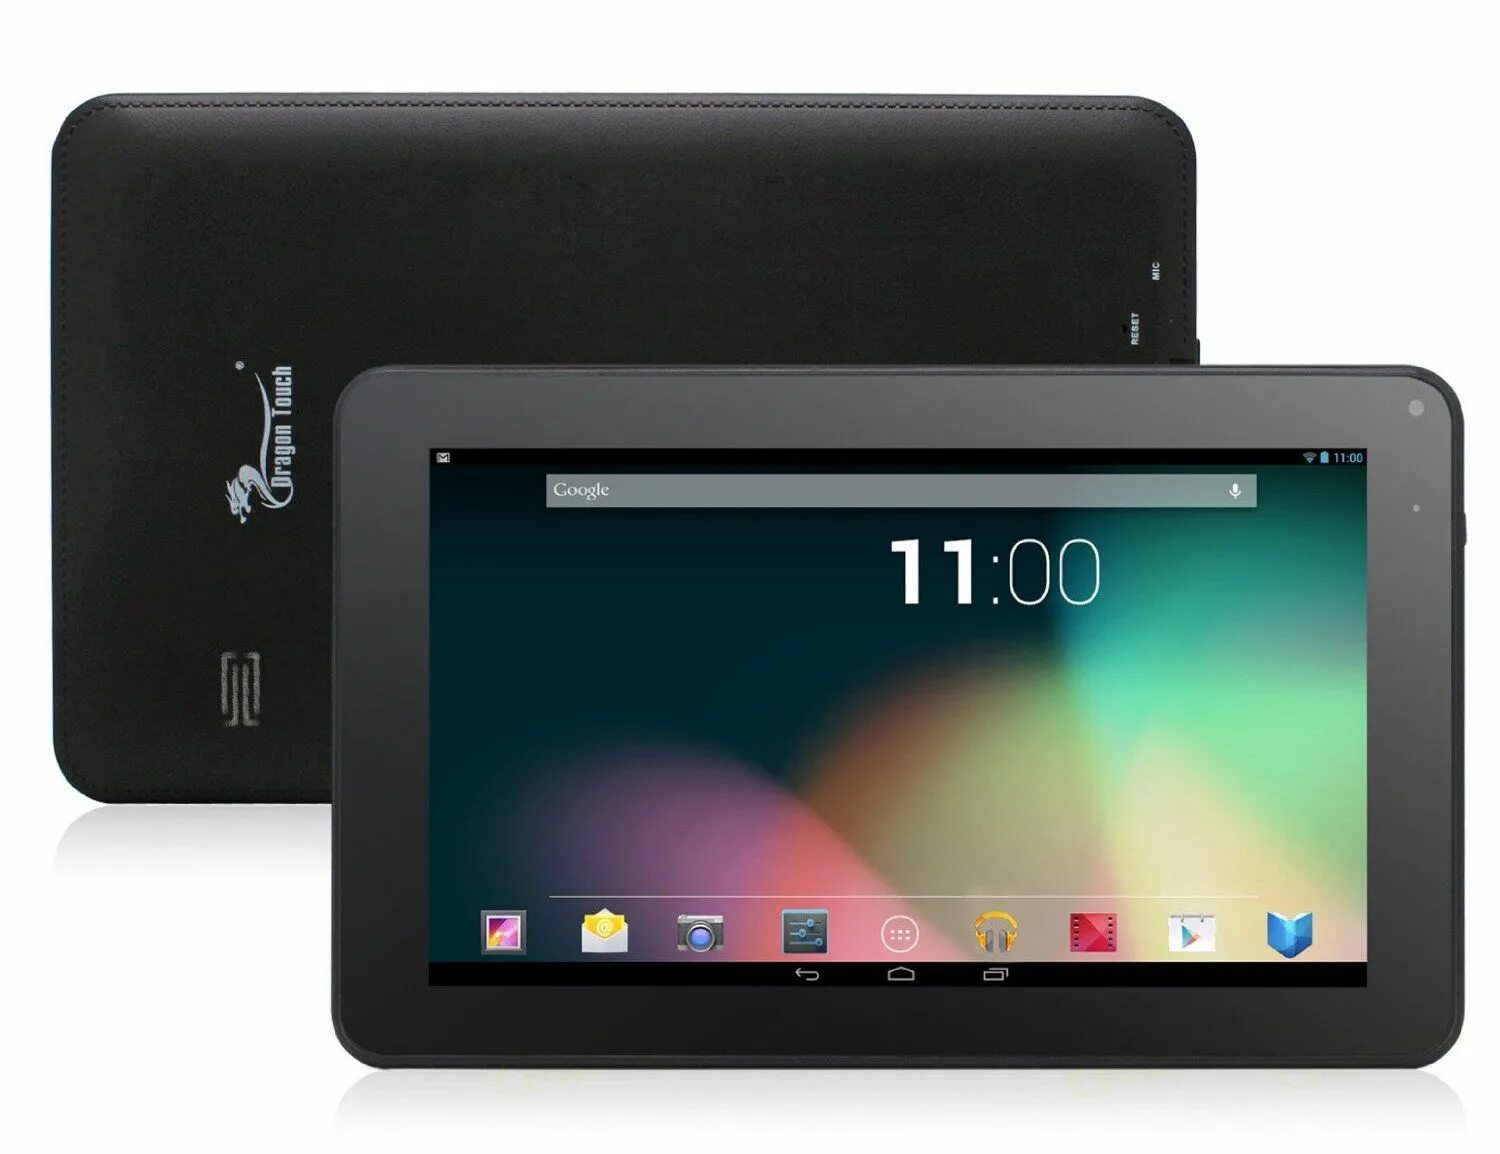 Atouch x19pro планшет. ATOUCH x18 Tablet PC чехол. Планшет ATOUCH. ATOUCH планшет цвет зелёный x18 Tablet PC. Планшет ATOUCH x19 Pro 5g.